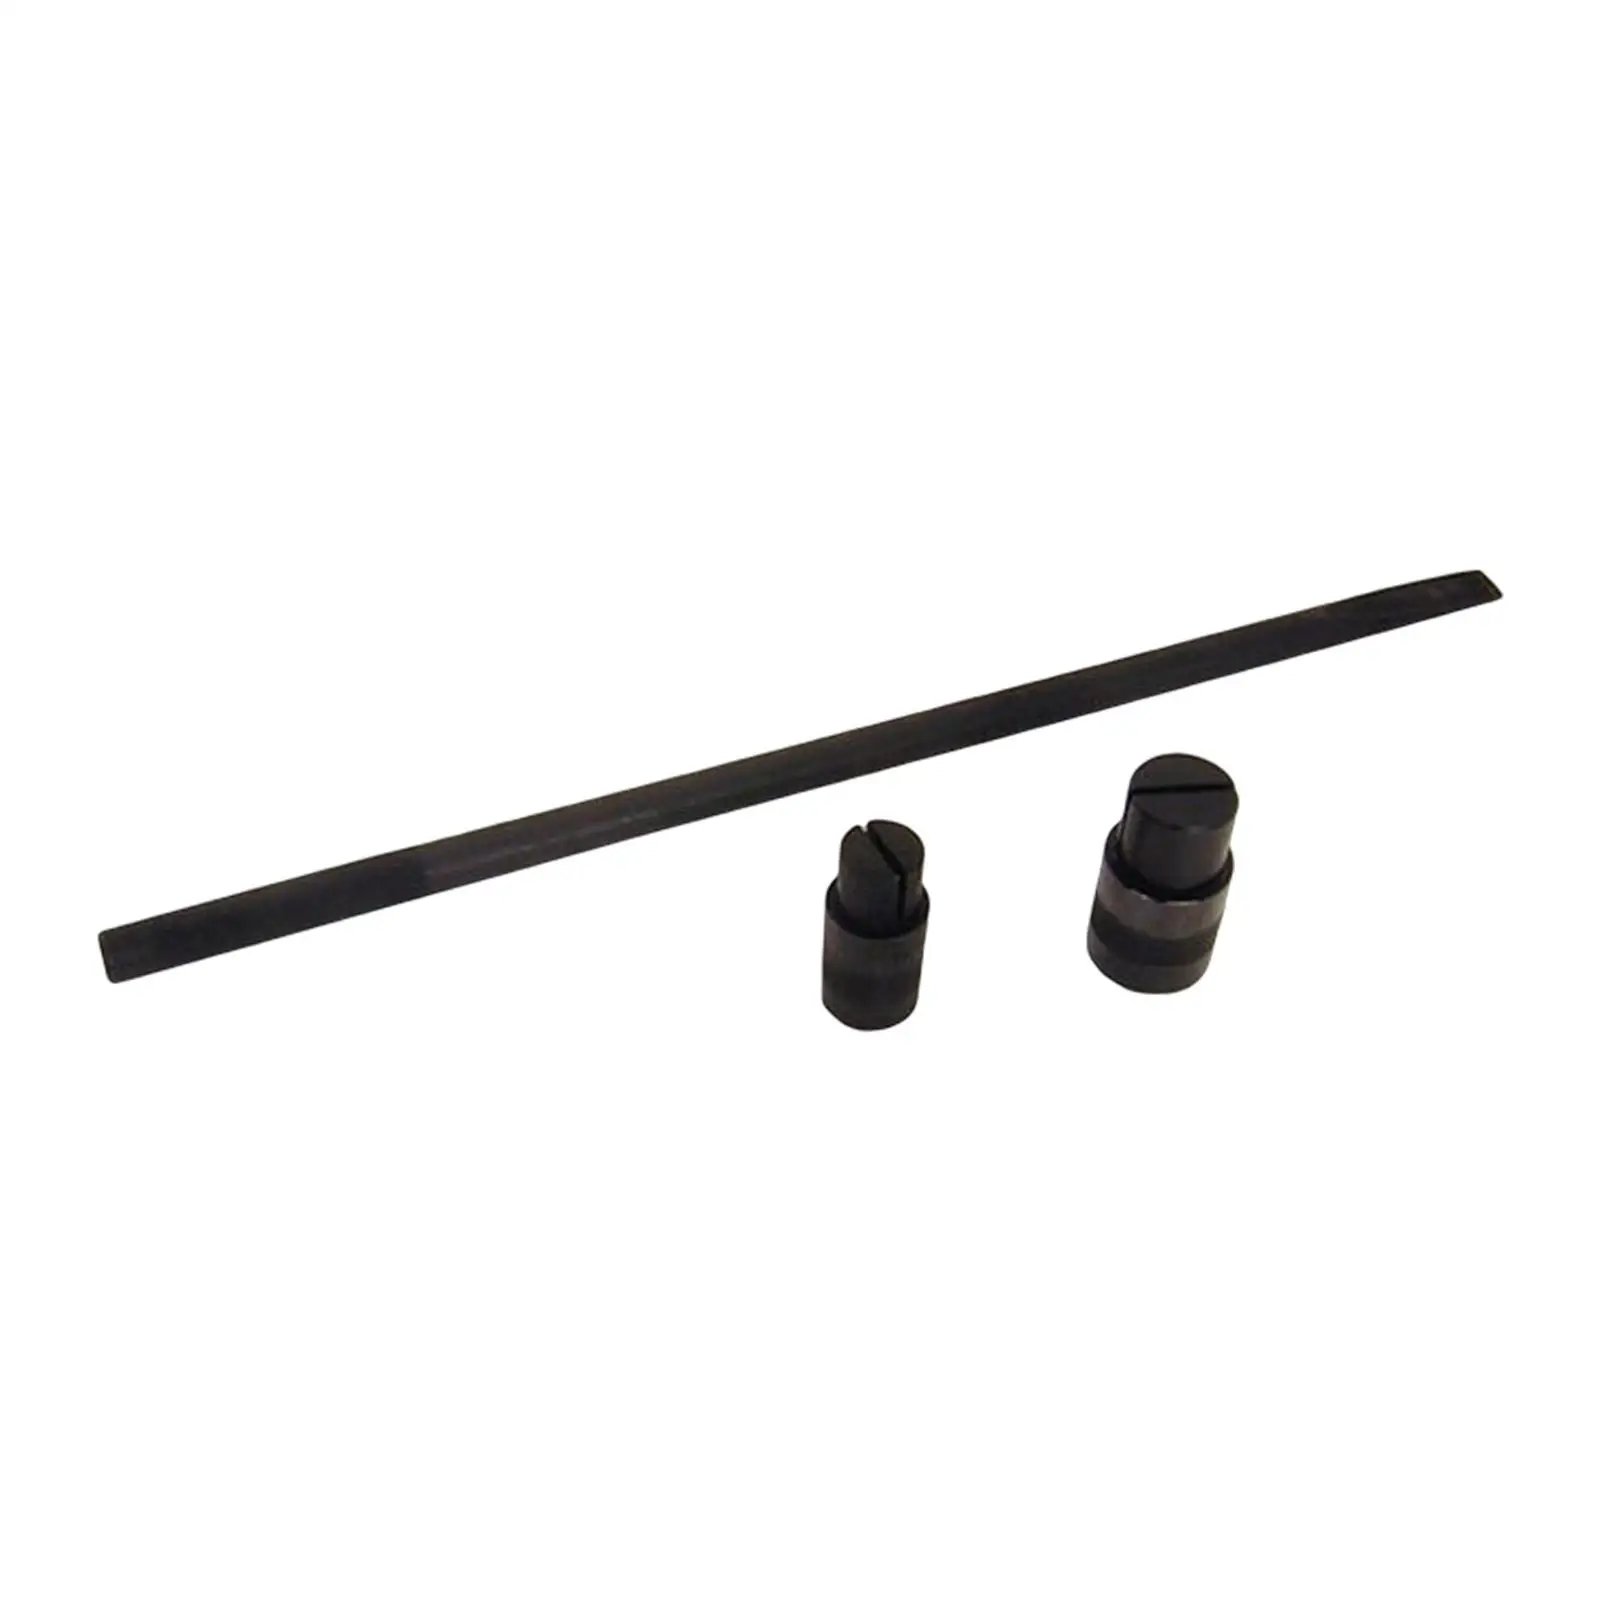 3 Piece Bearing Remover Set replacements for Davidson Good Performance